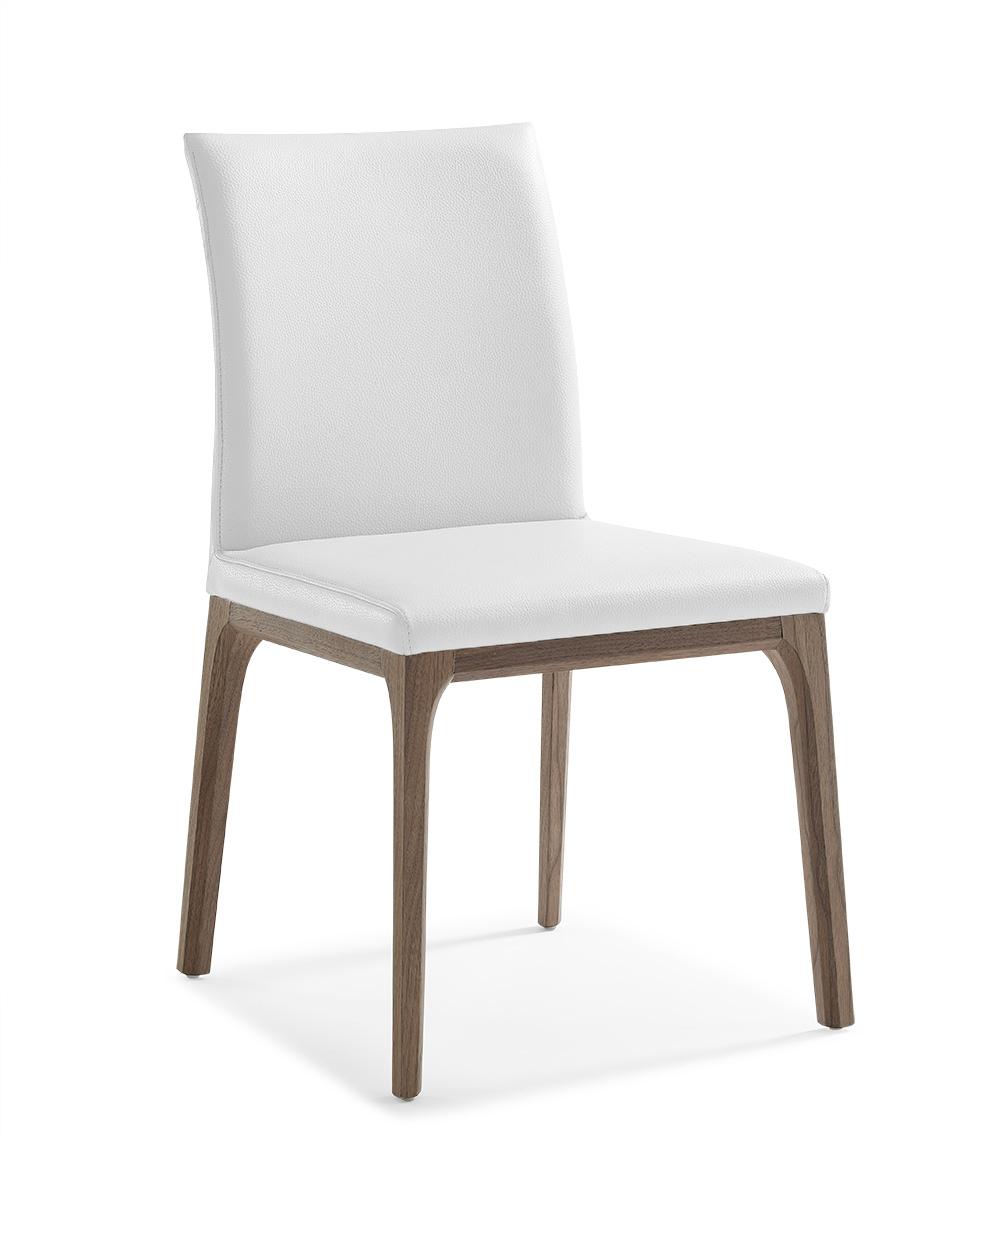 Modern Dining Chair Set DC1454-WLT/WHT Stella DC1454-WLT/WHT in Walnut, White Faux Leather